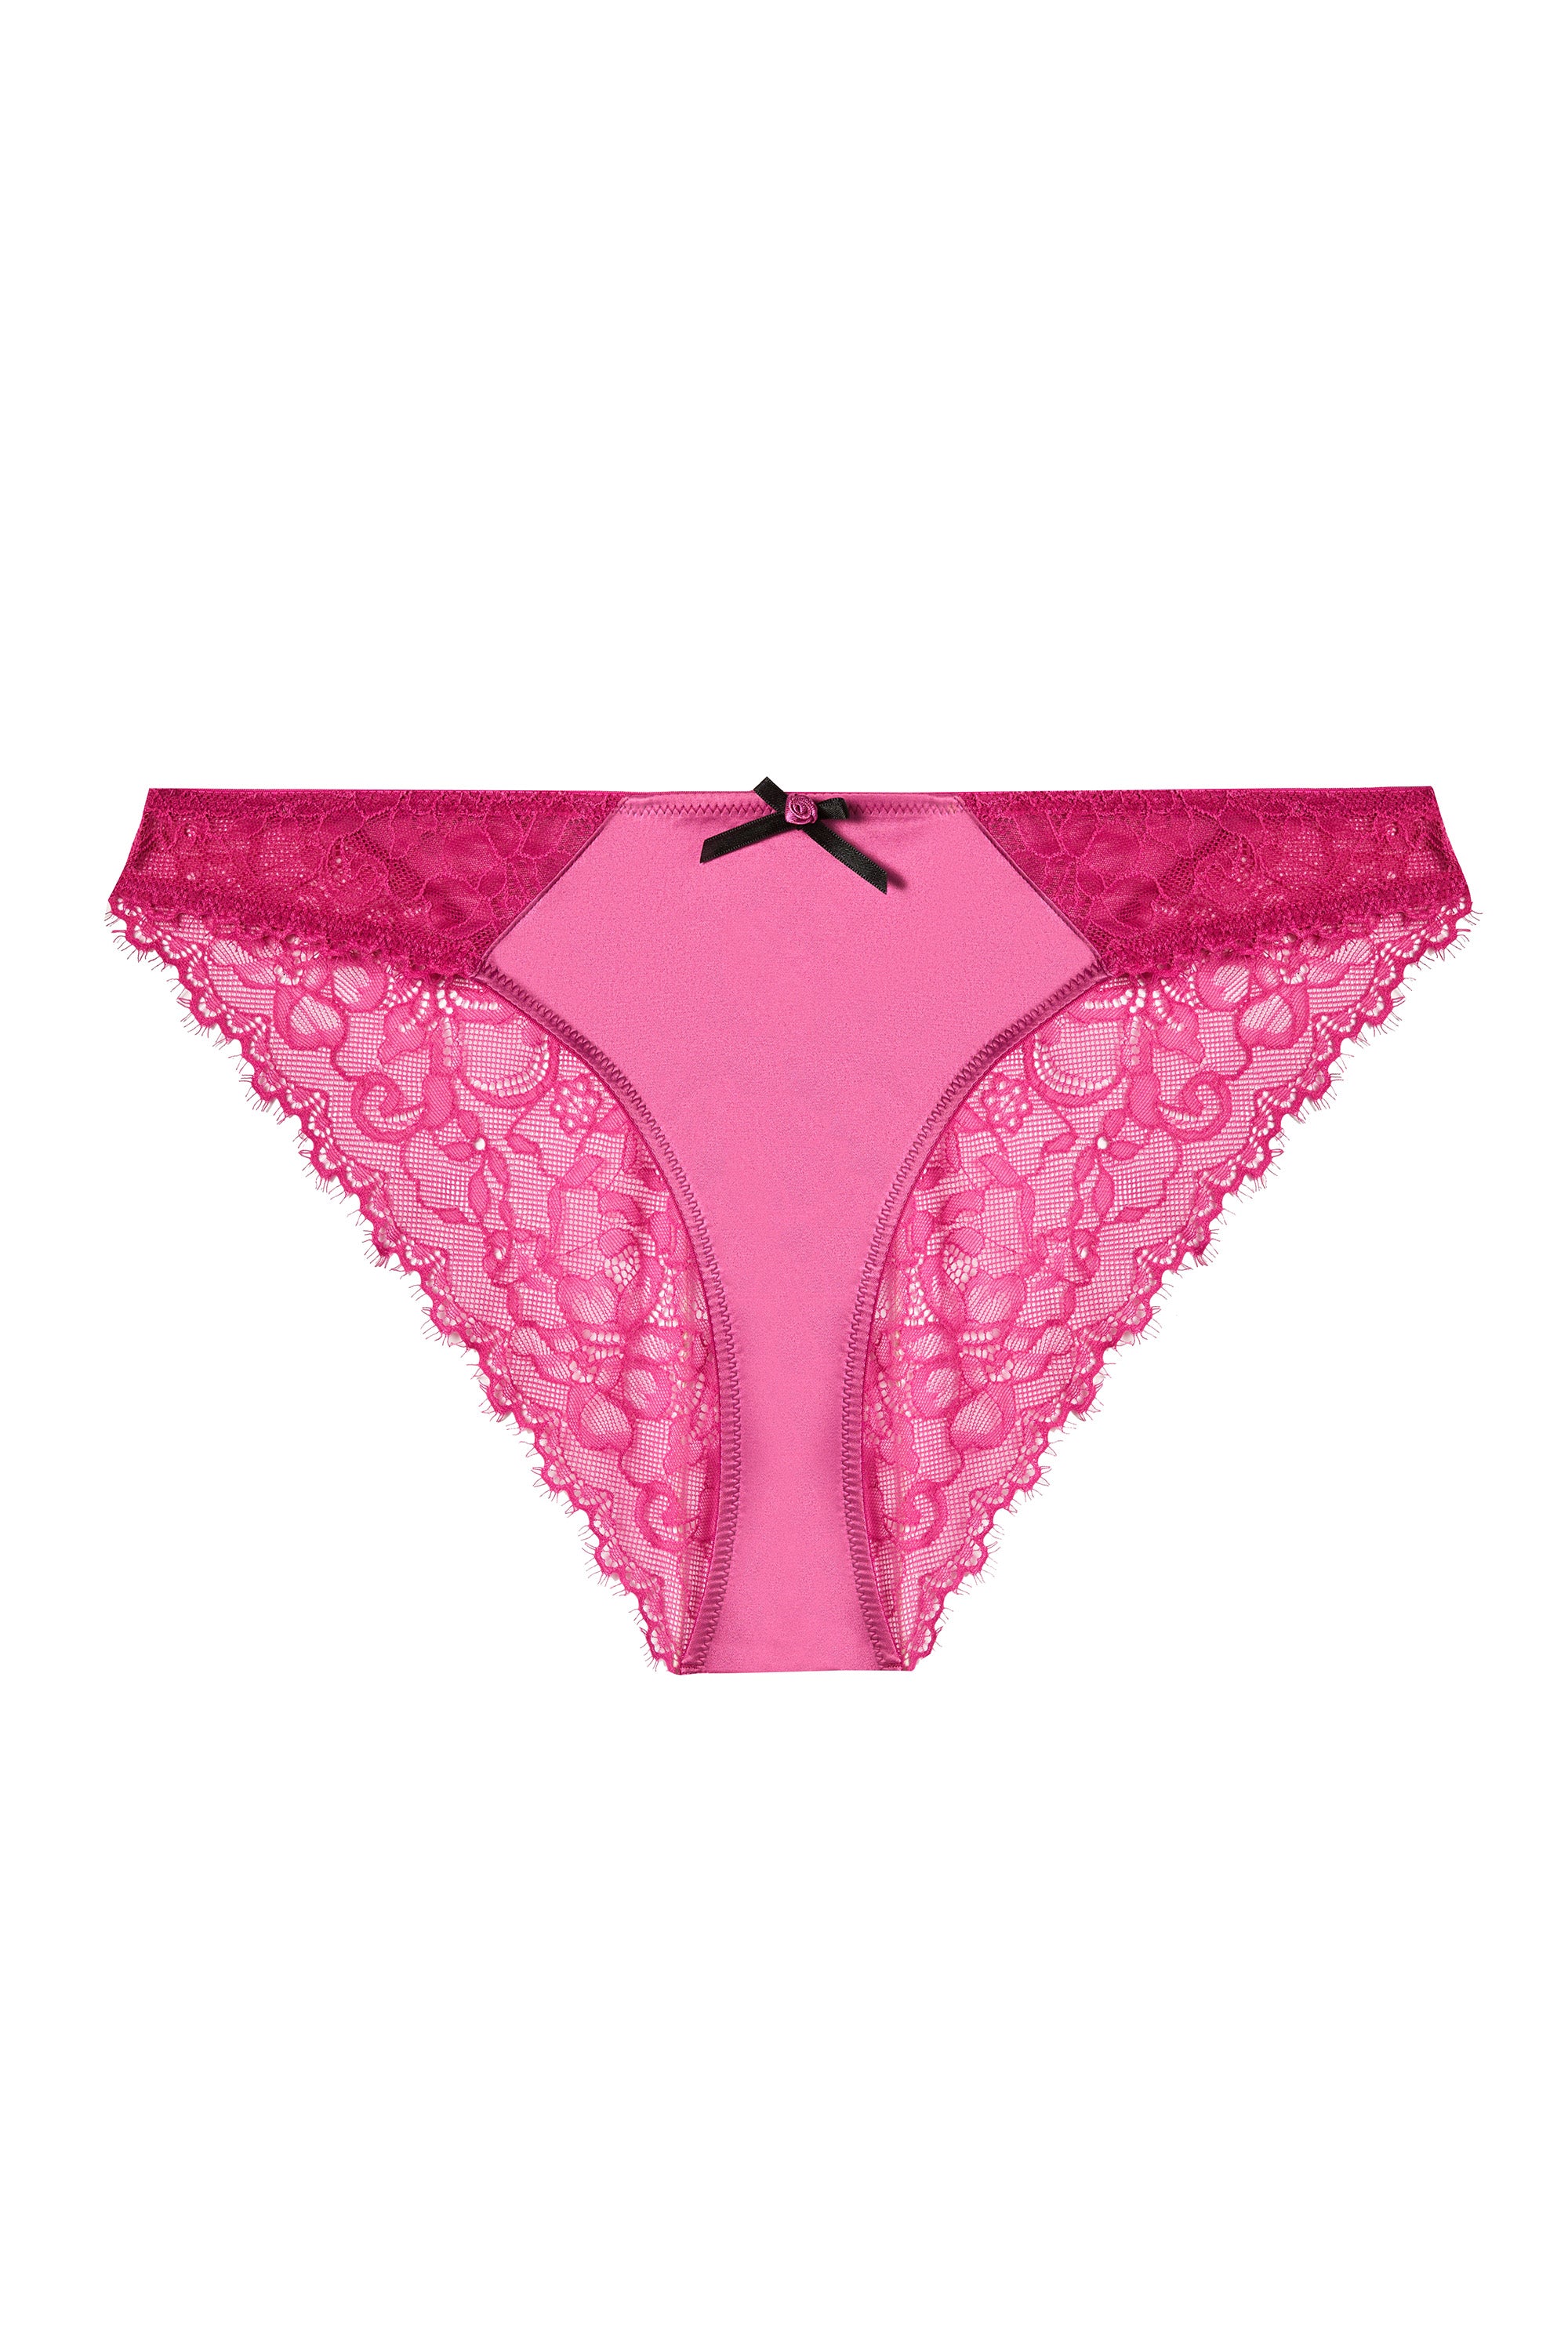 Rosalyn Magenta Satin and Lace brief - sizes 4-16 - Toronto